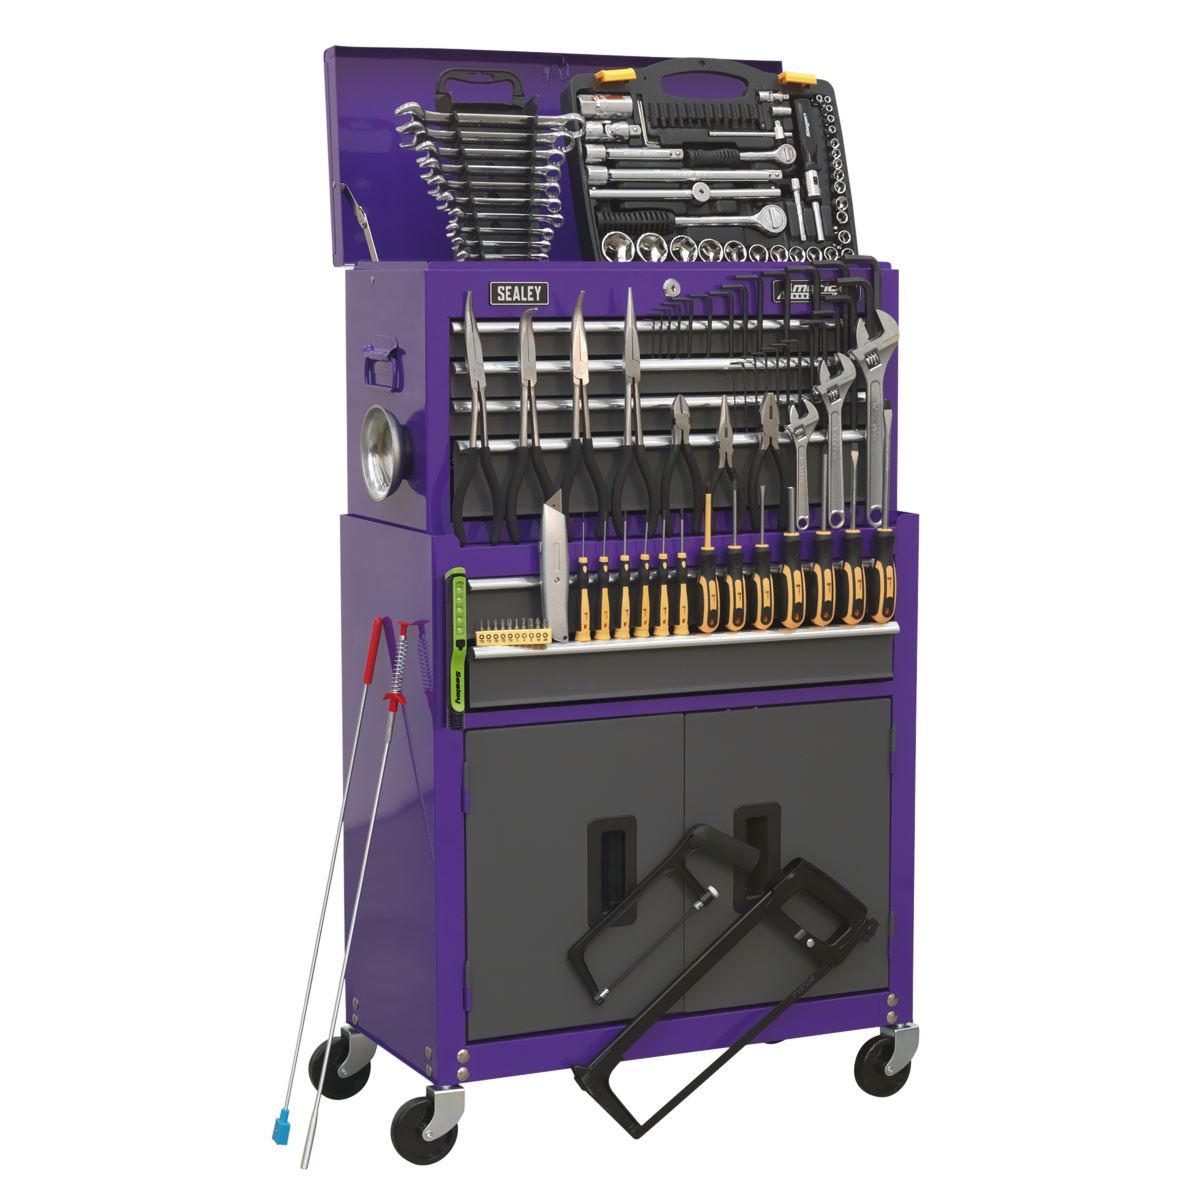 Sealey American Pro Topchest & Rollcab Combination 6 Drawer with Ball-Bearing Slides - Purple/Grey & 170pc Tool Kit